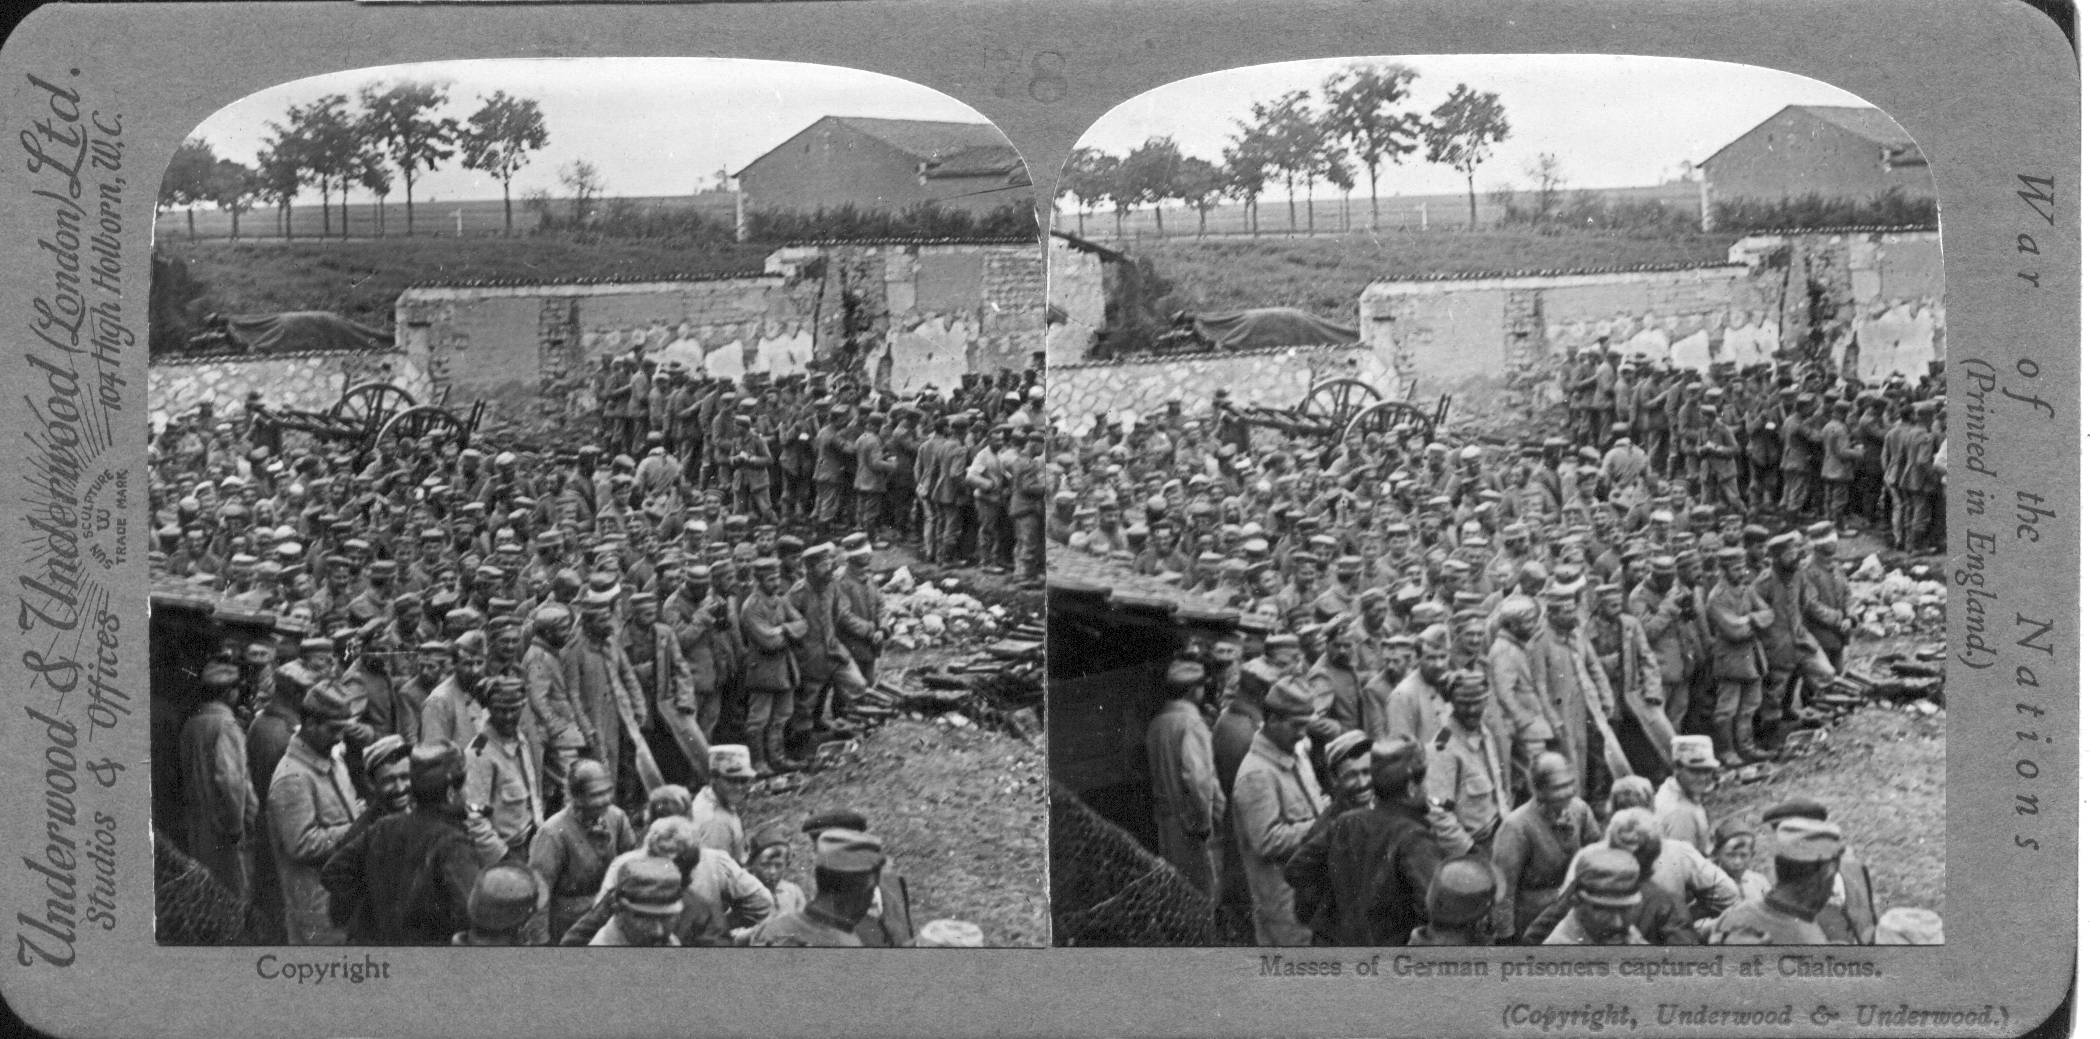 Masses of German prisoners captures at Chalons